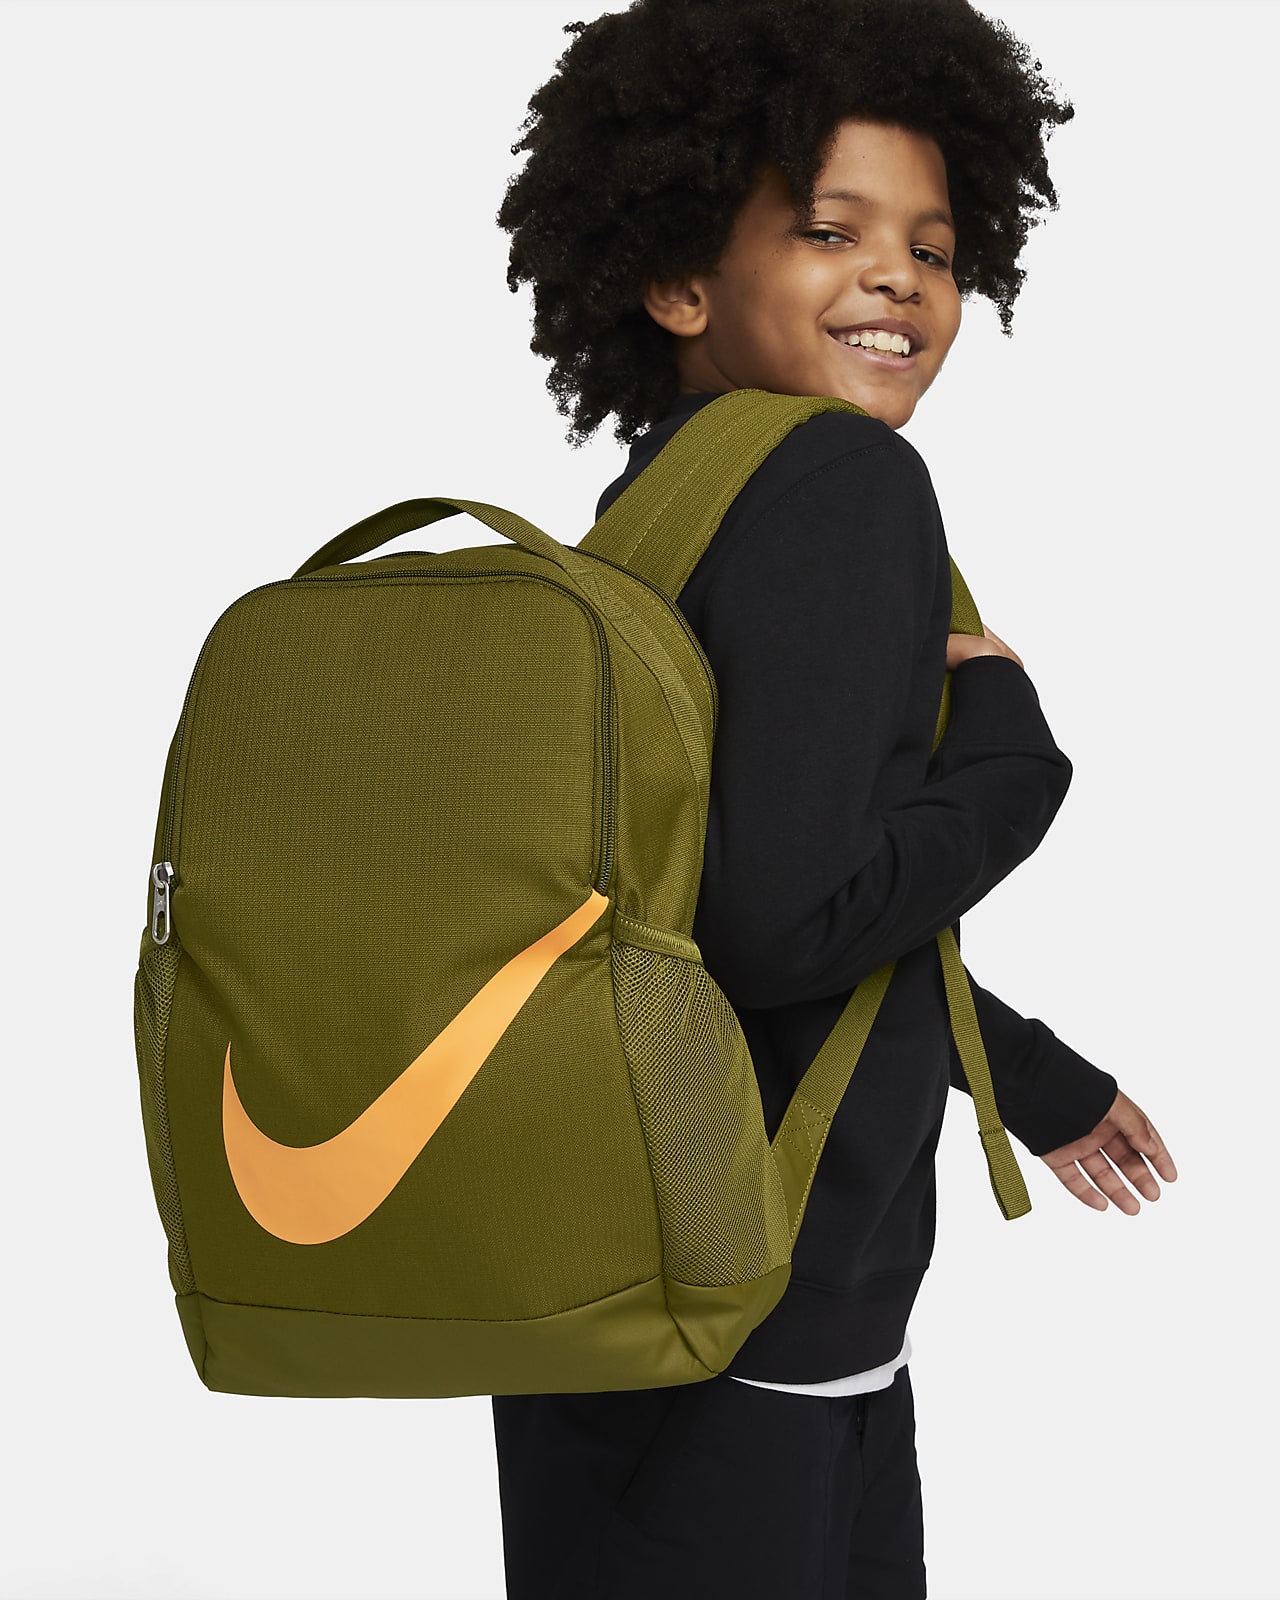 Where can I find Nike backpacks for cheap rates in Delhi? - Quora